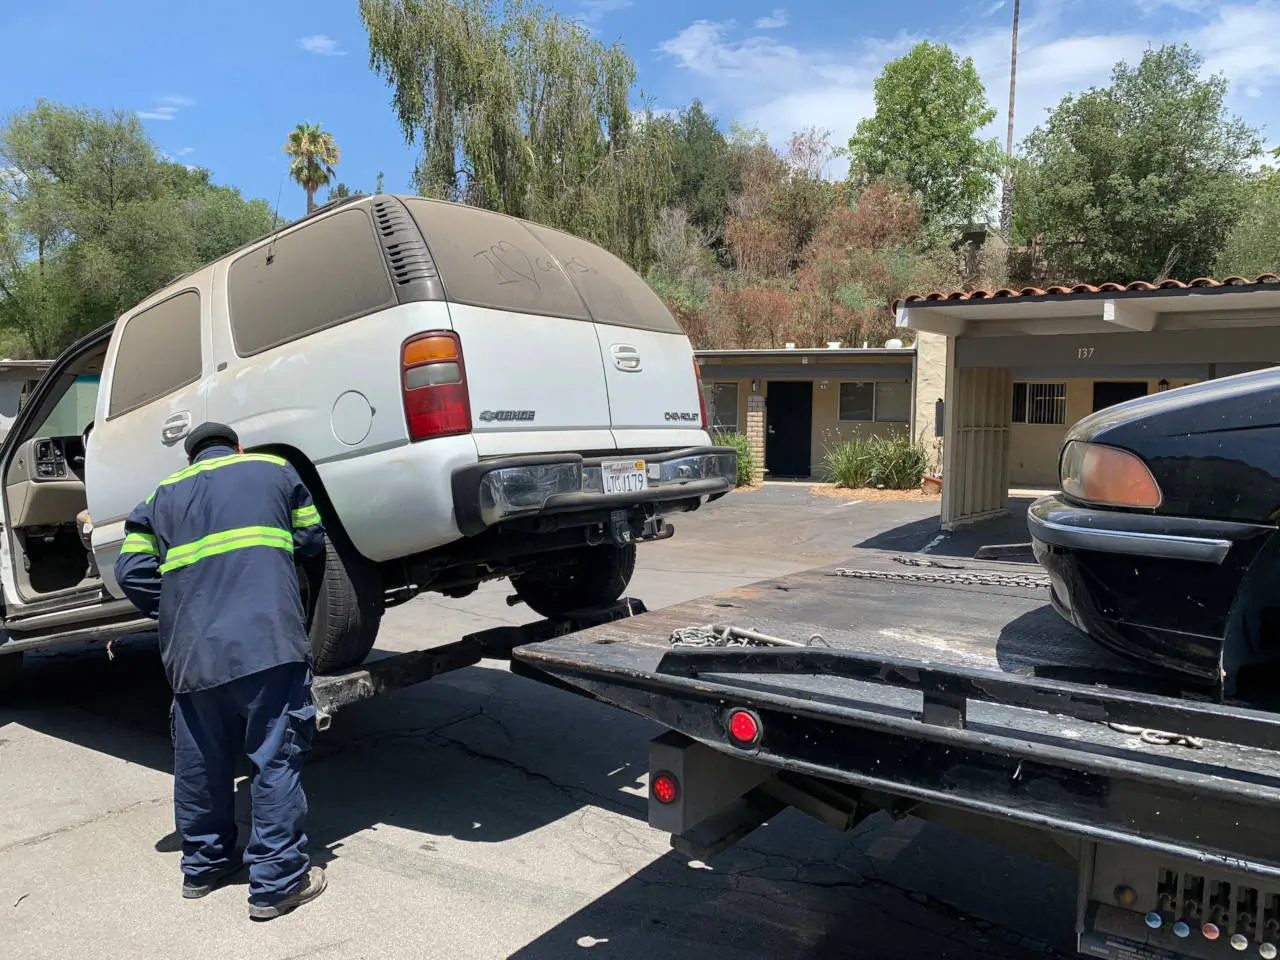 San Diego Towing is All Roadside Towing - Doubling 2 cars on a flatbed tow truck